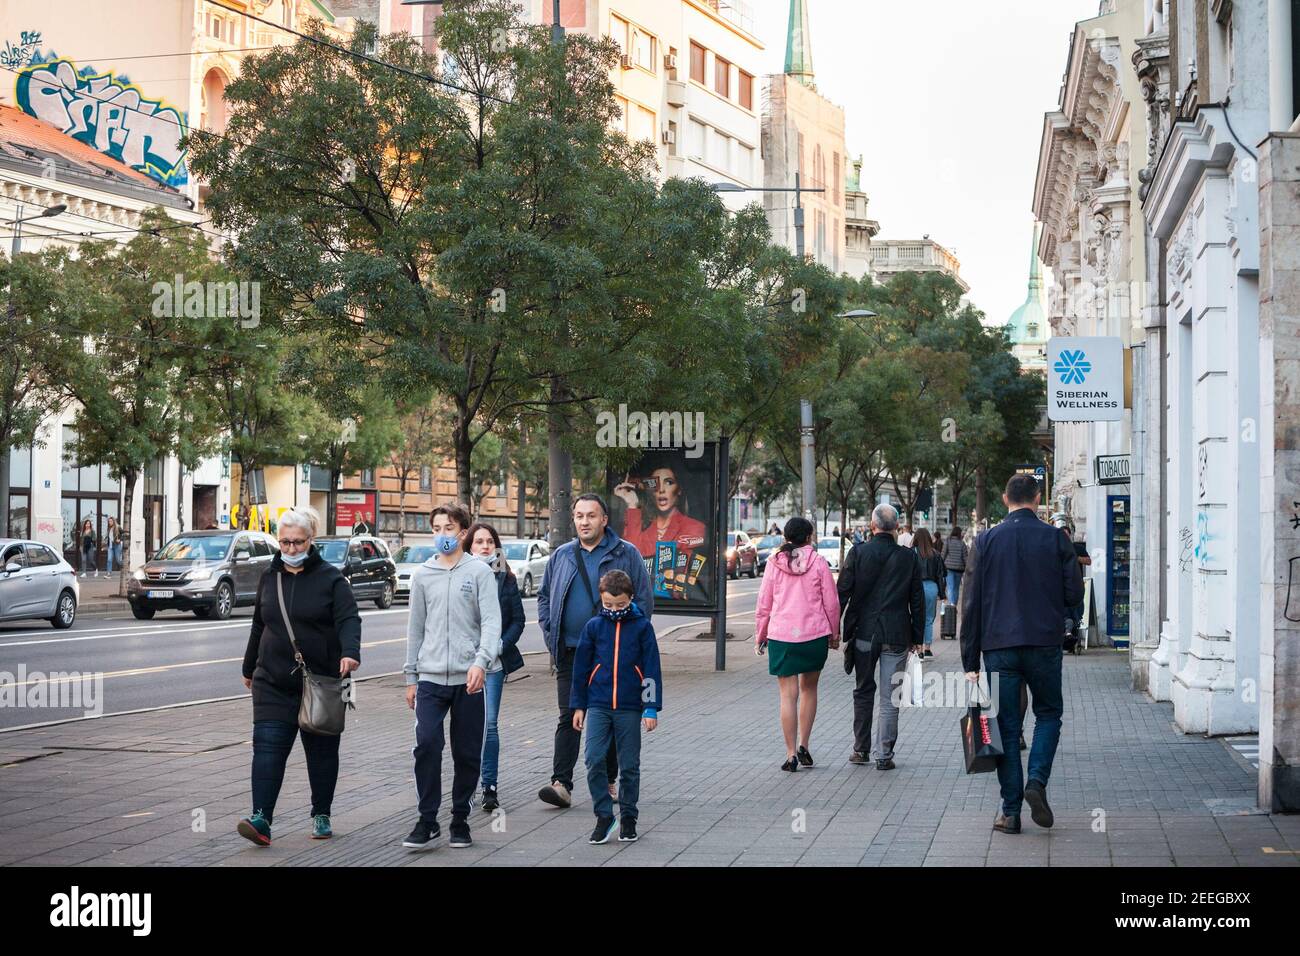 BELGRADE, SERBIA - OCTOBER 10, 2020: Family, a mother, father, man, woman, and their kidswalking wearing with only few persons wearing face mask prote Stock Photo